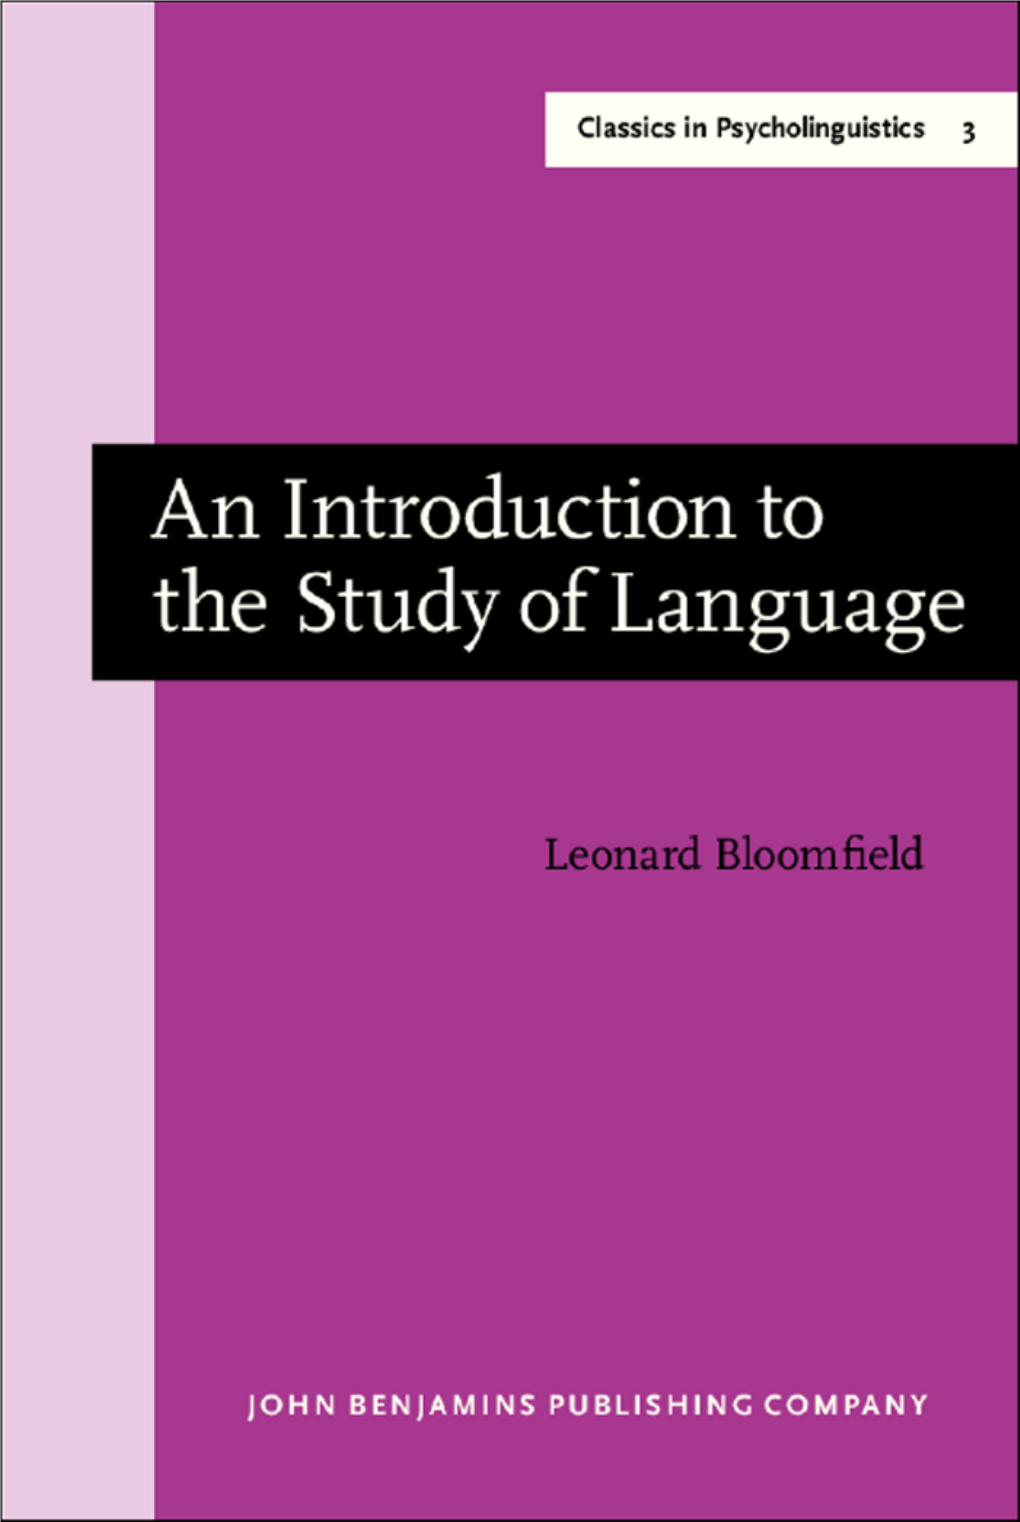 An Introduction to the Study of Language LEONARD BLOOMFIELD